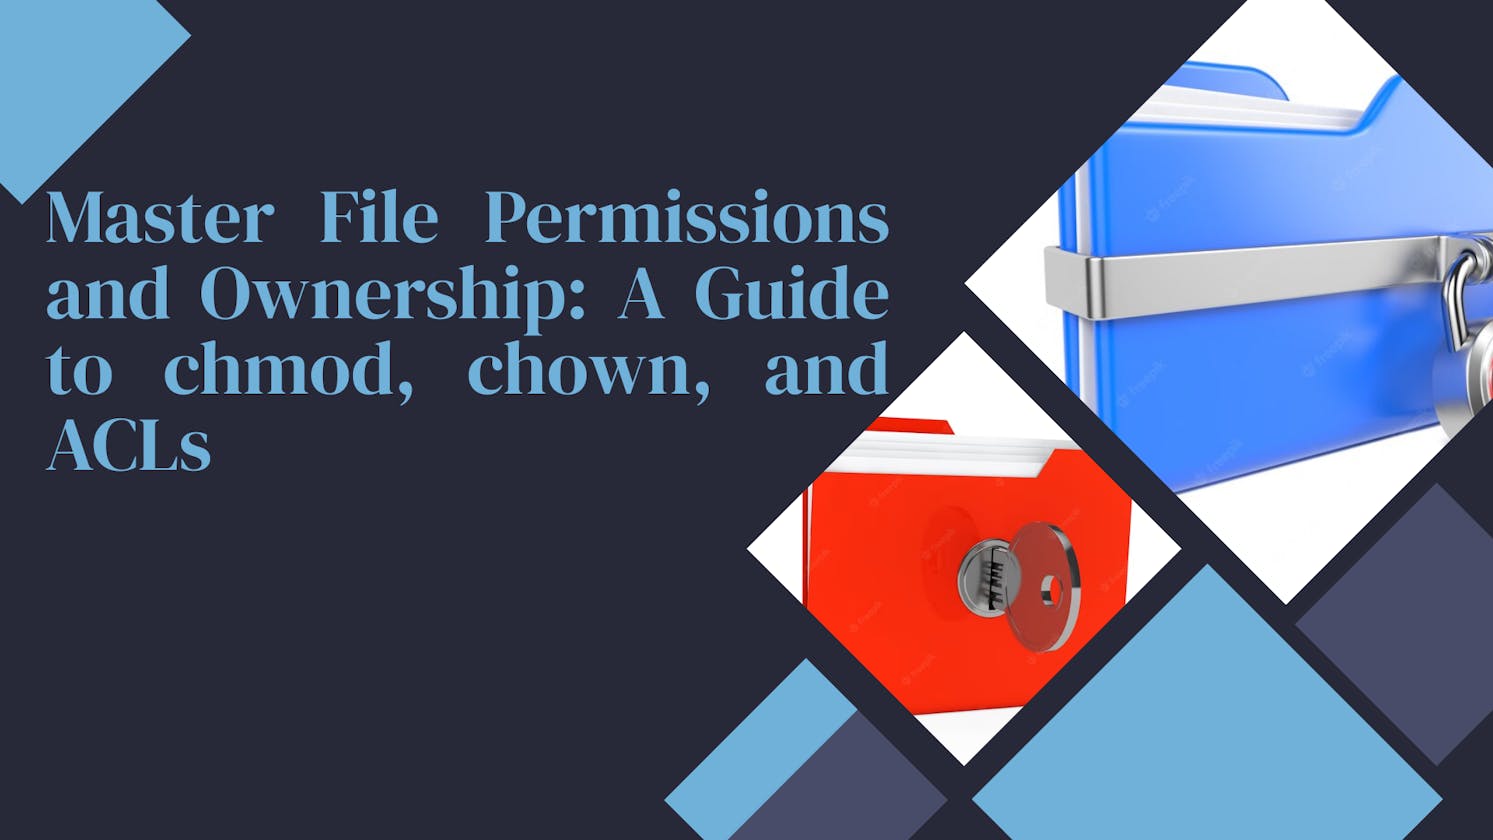 Master File Permissions and Ownership: A Guide to chmod, chown, and ACL Commands